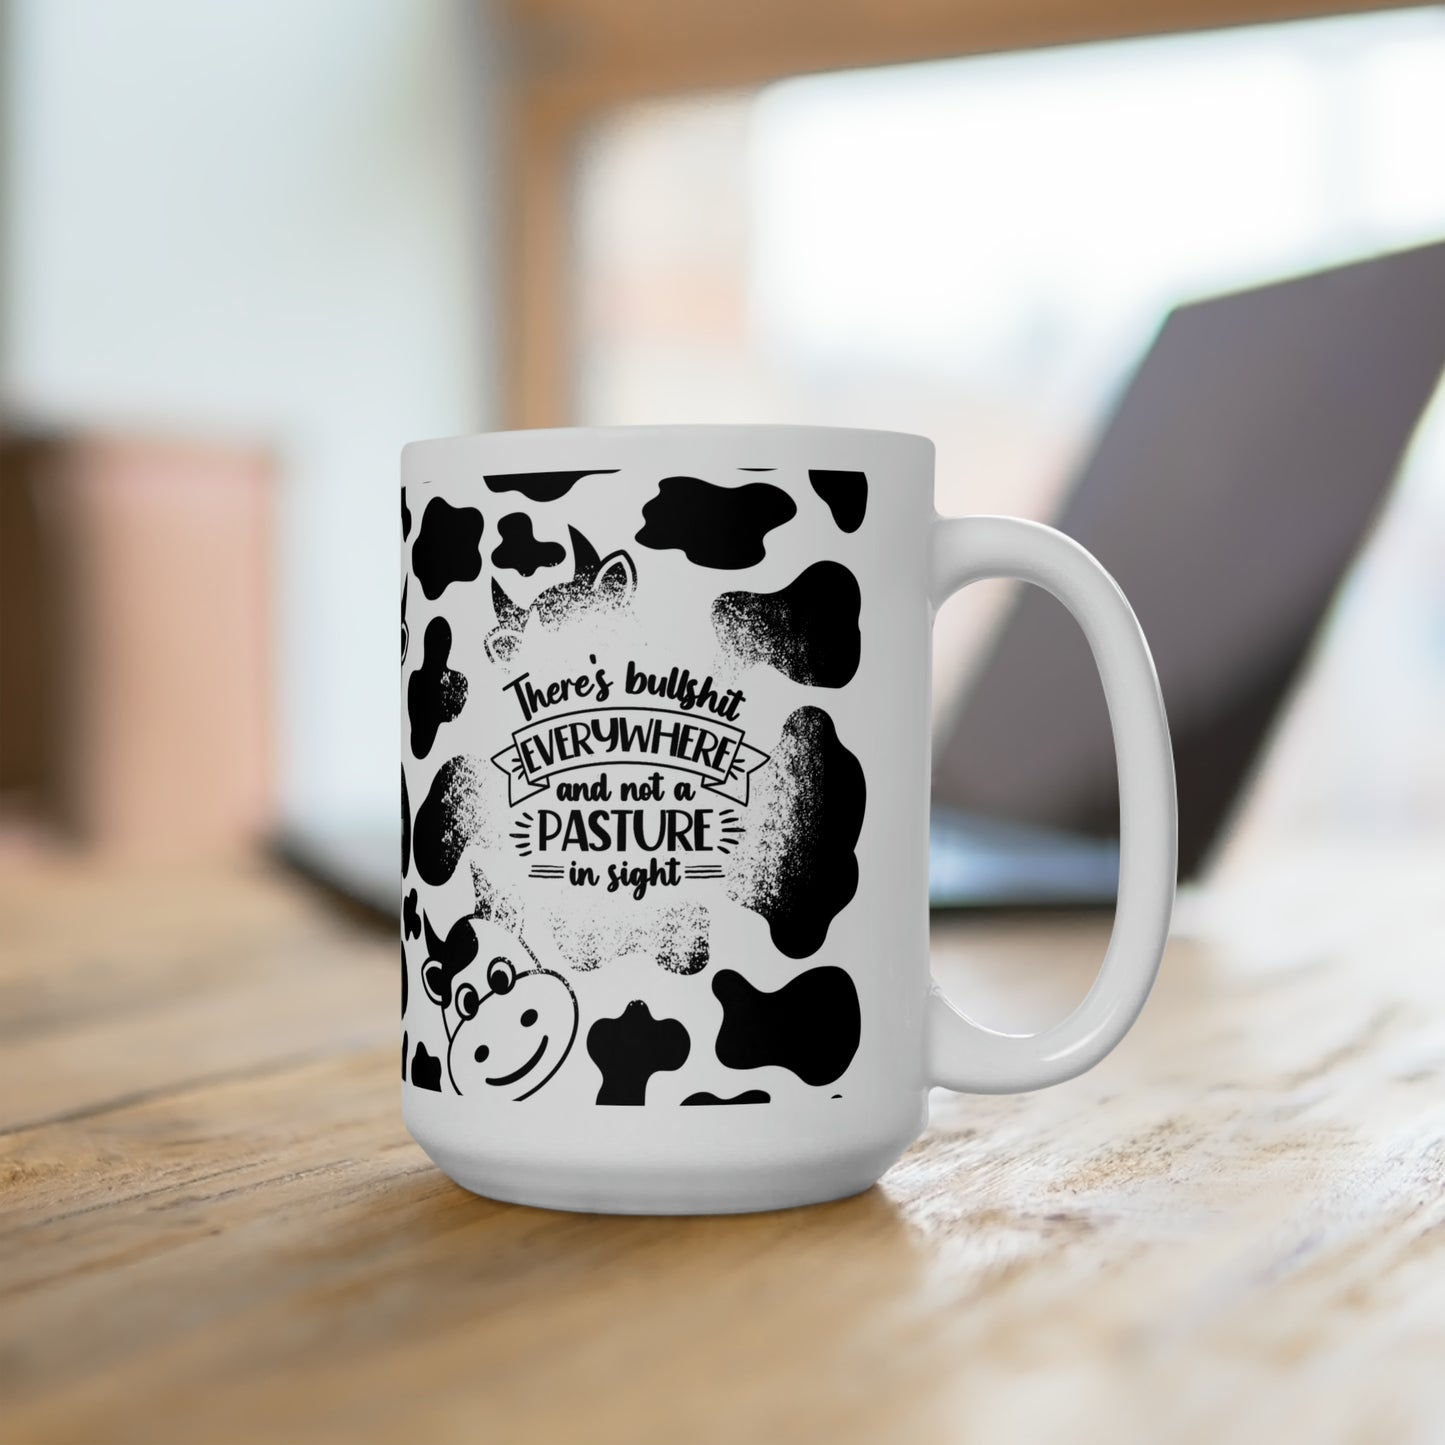 Moo-Gic in a Mug: Sip and Smile with Our Charming Cow-Themed Delight!